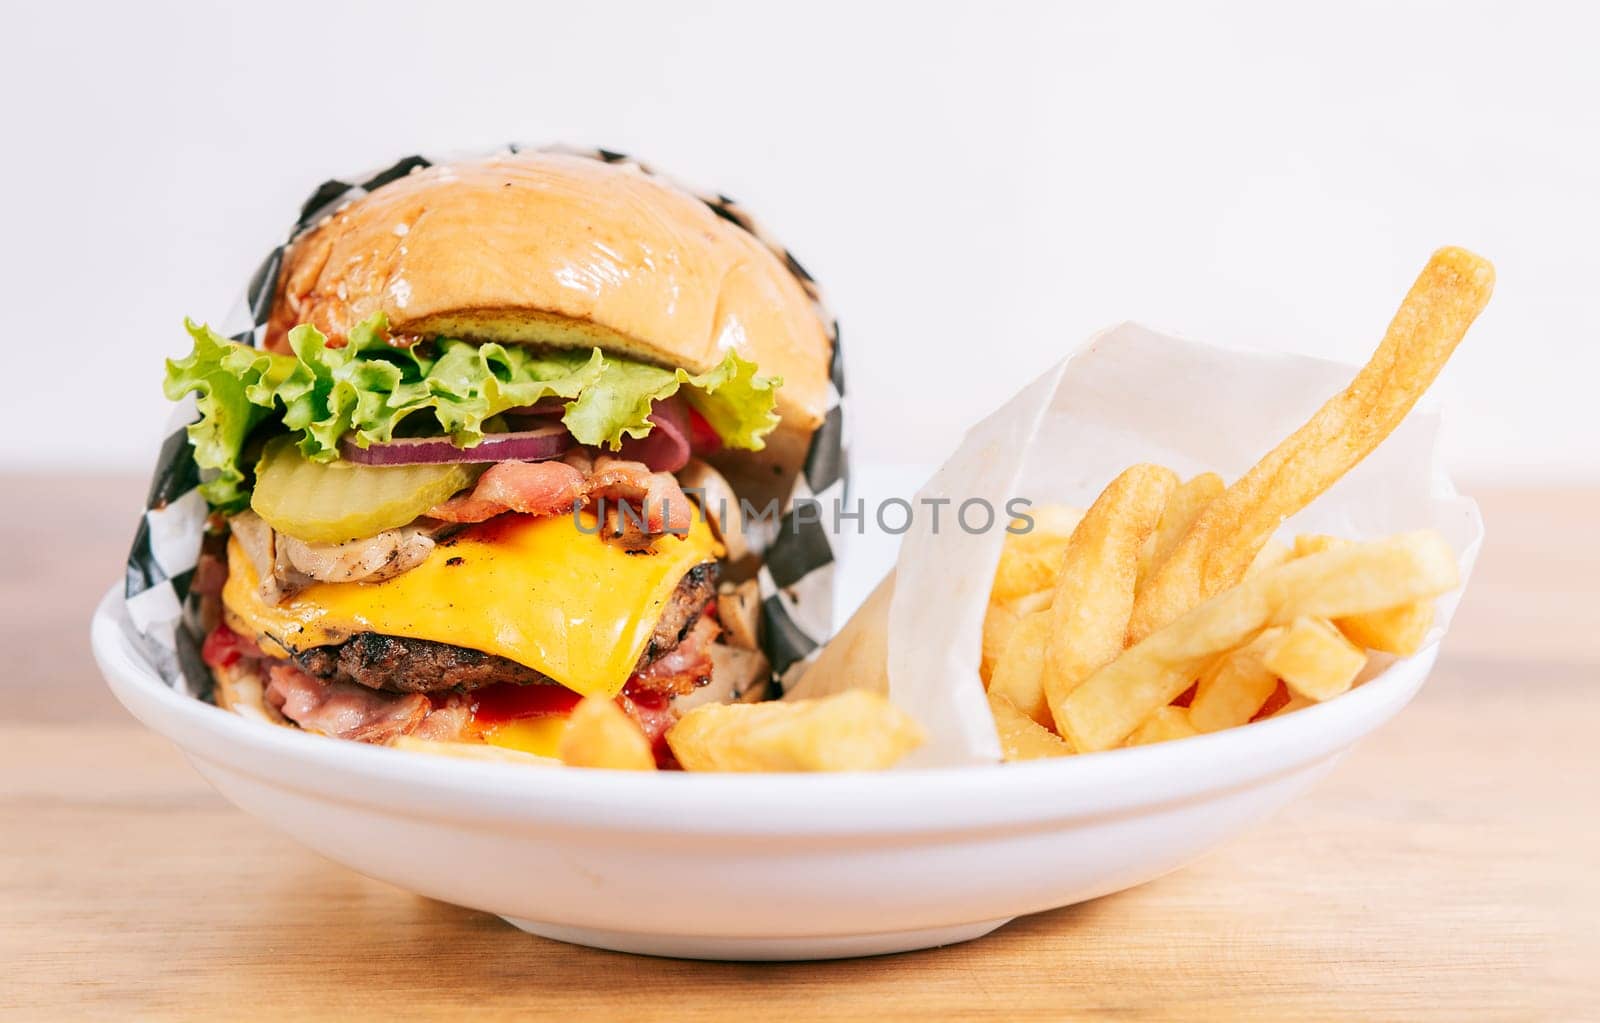 Cheeseburger with fries on wooden table. Close up of a delicious hamburger with french fries on wooden table with copy space by isaiphoto